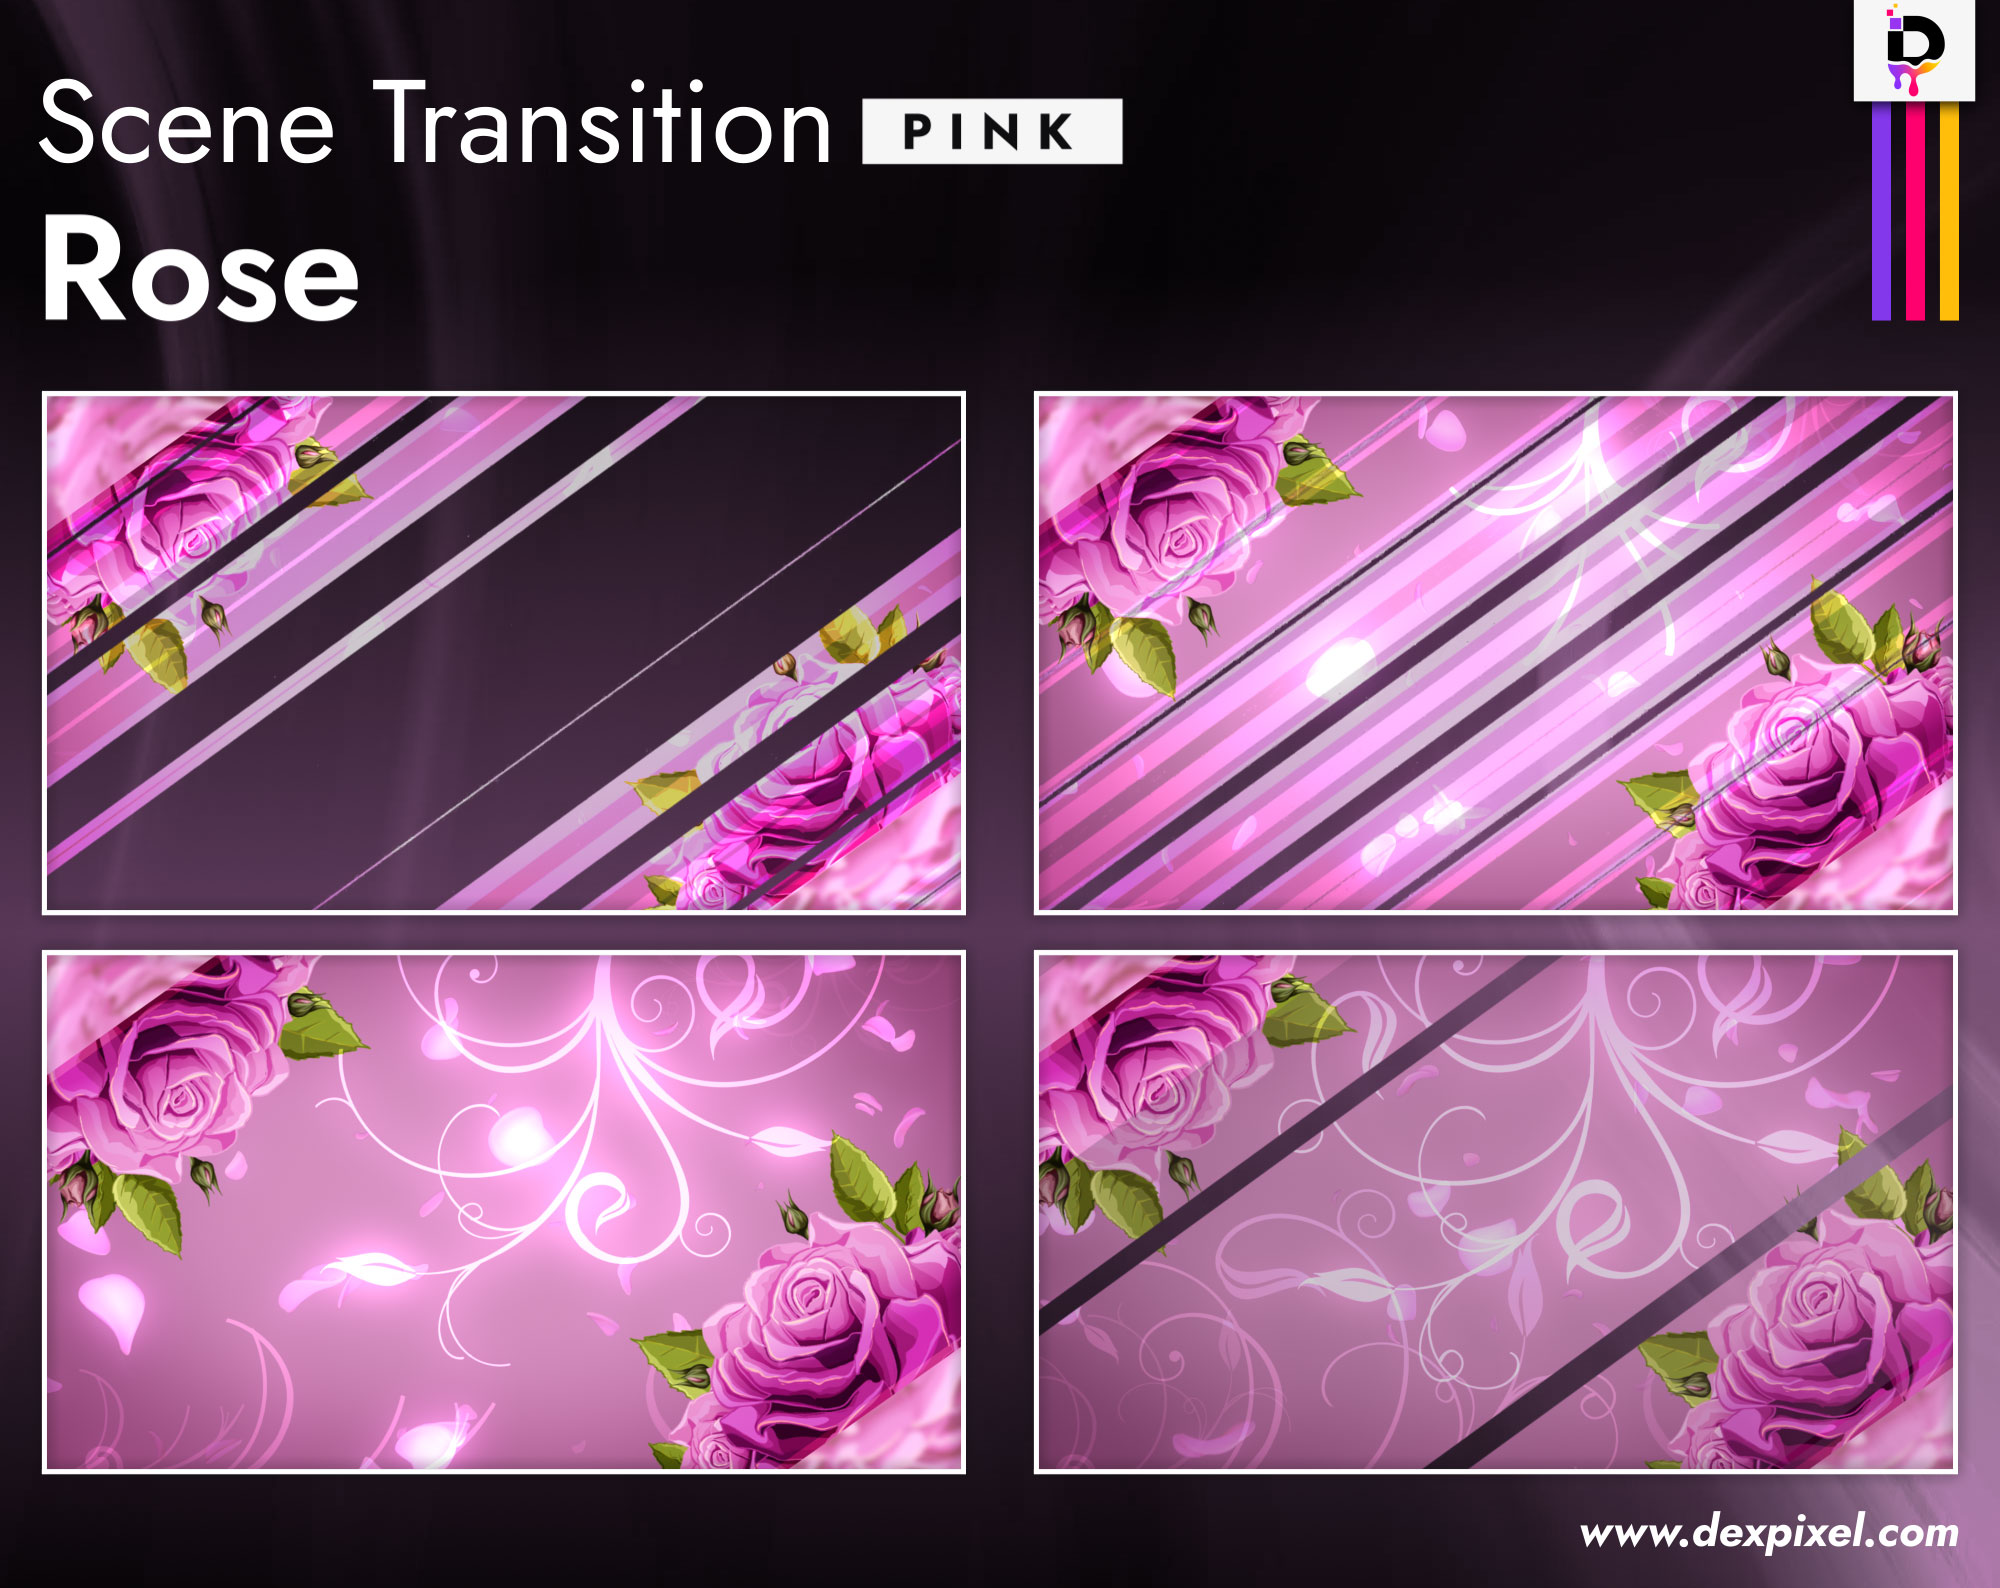 Rose Stream Transition | Girly Rose Stream Transition | Beautiful Roses Stream Stinger | Twitch Scenes Transition | Twitch Roses Obs Transition